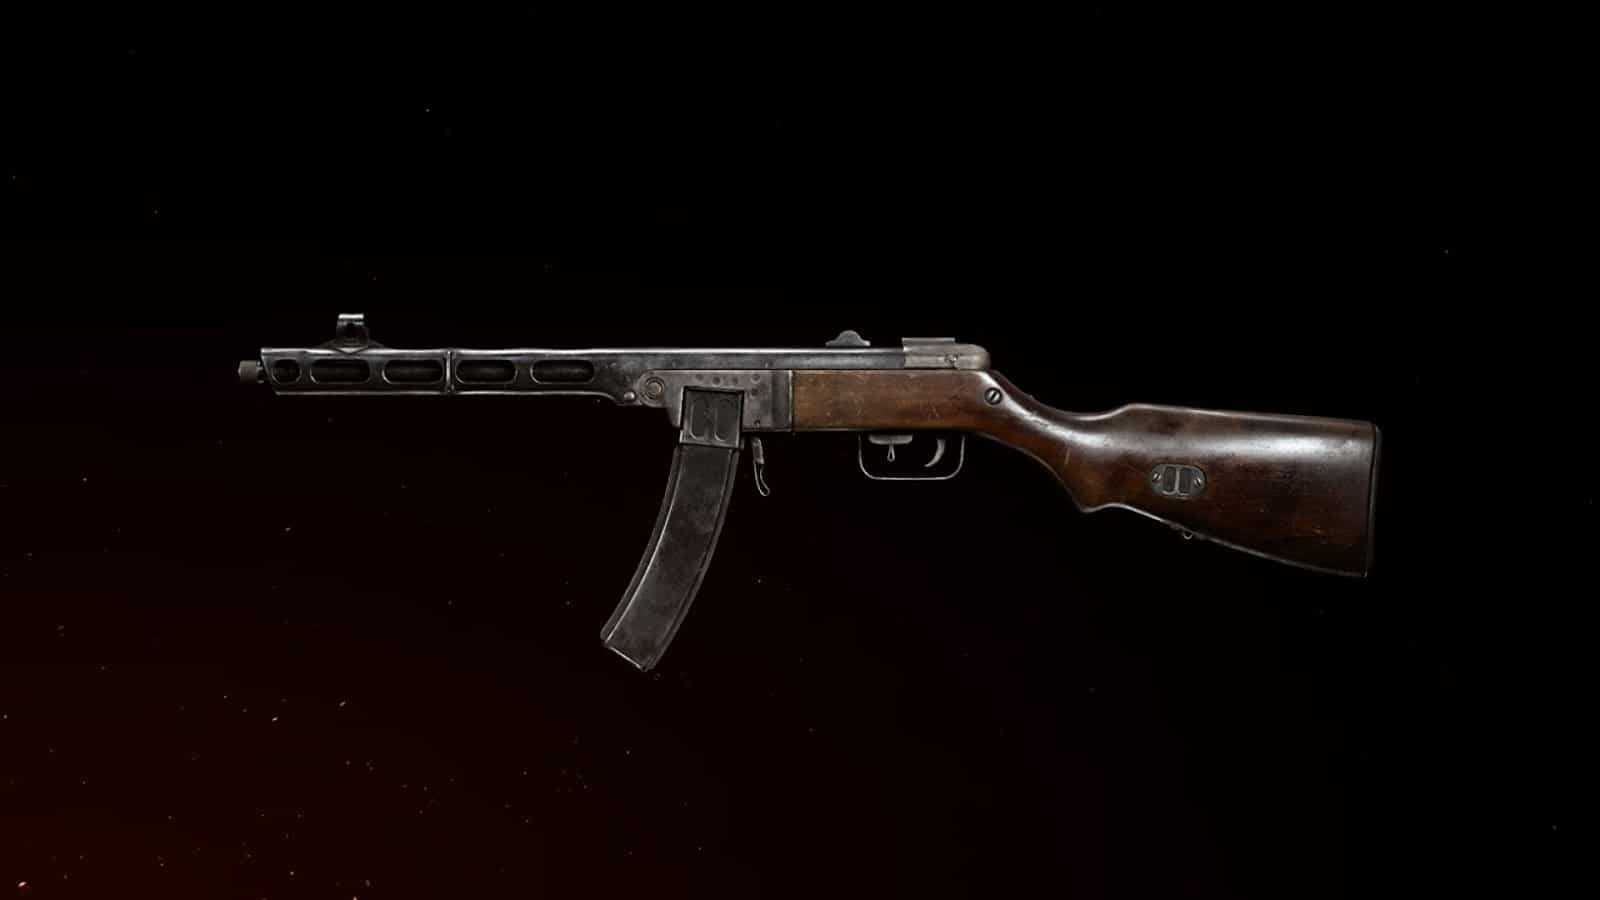 The PPSH-41, featuring its classic design with a black metal and woodgrain stock